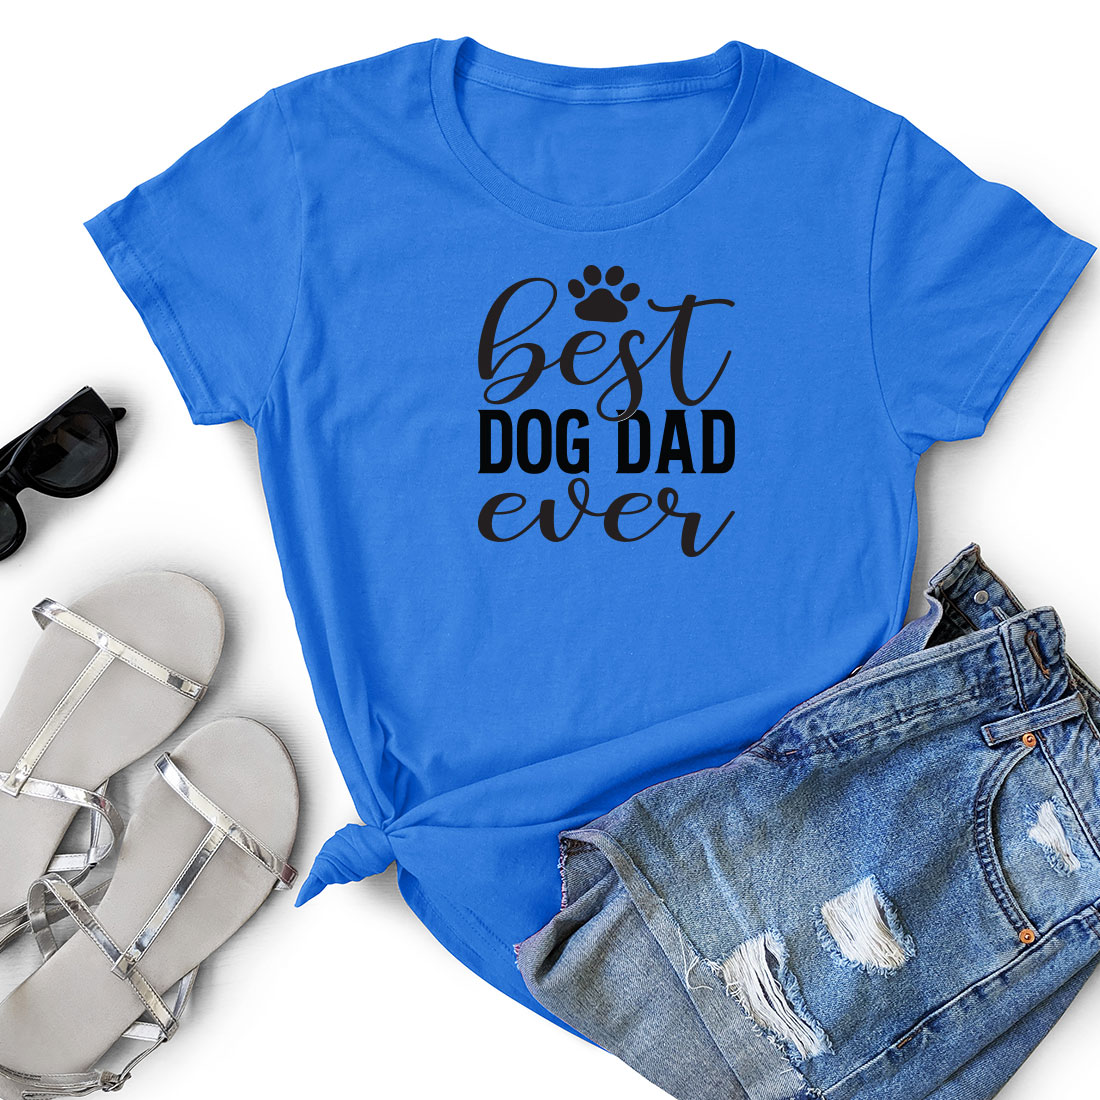 T - shirt that says best dog dad ever next to a pair of shorts.